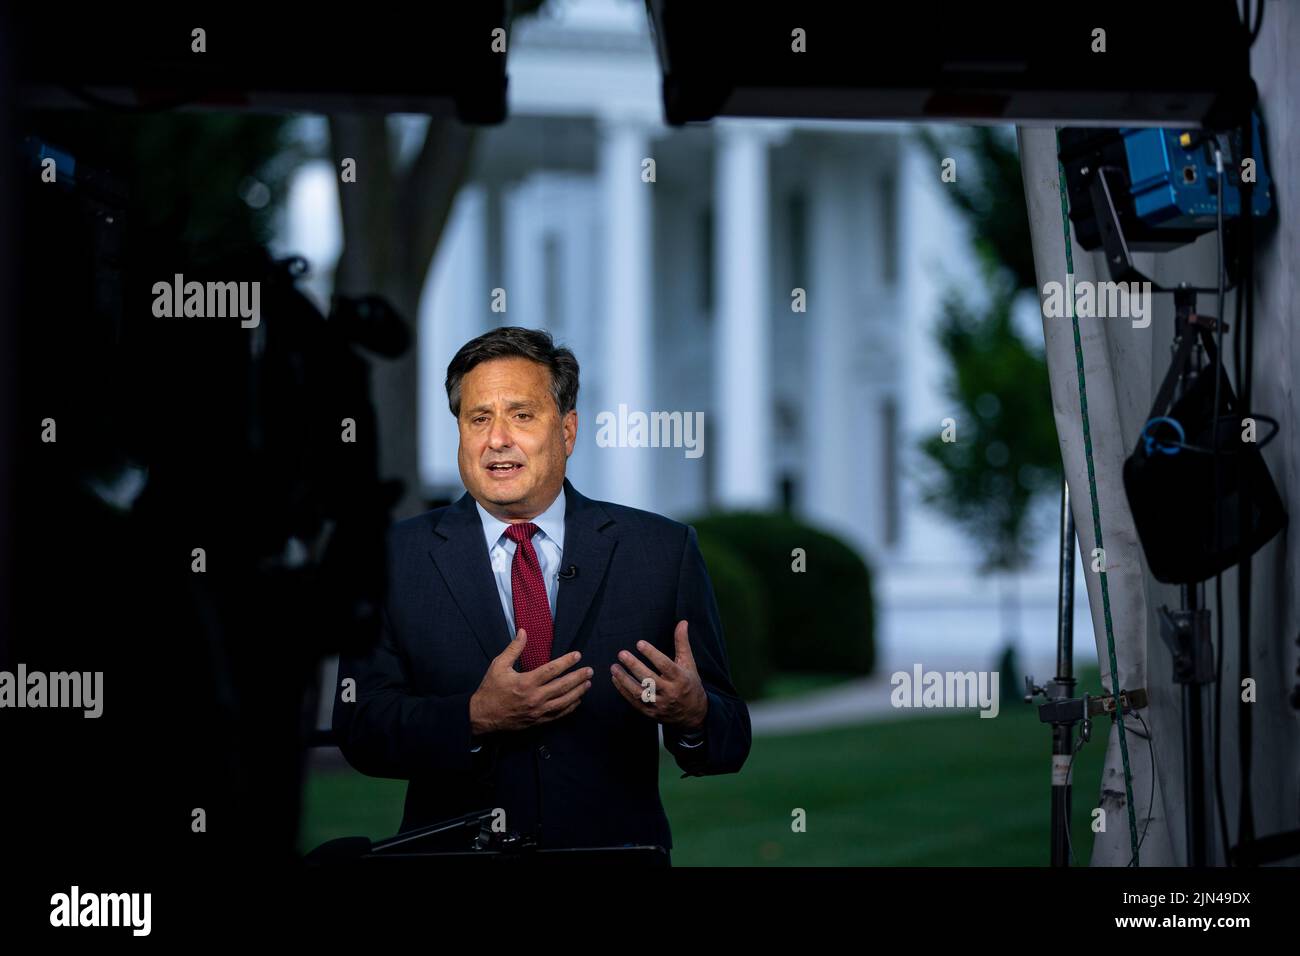 Washington, DC, USA. 8th Aug, 2022. Ron Klain, White House chief of staff, speaks during a television interview on the North Lawn of the White House in Washington, DC, US, on Monday, Aug. 8, 2022. US President Joe Biden resumed official travel today for the first time since his bout with Covid-19, traveling to Kentucky to show federal support for the state's recovery from historic flooding and to console survivors of the devastation. Credit: Al Drago/Pool via CNP/dpa/Alamy Live News Stock Photo